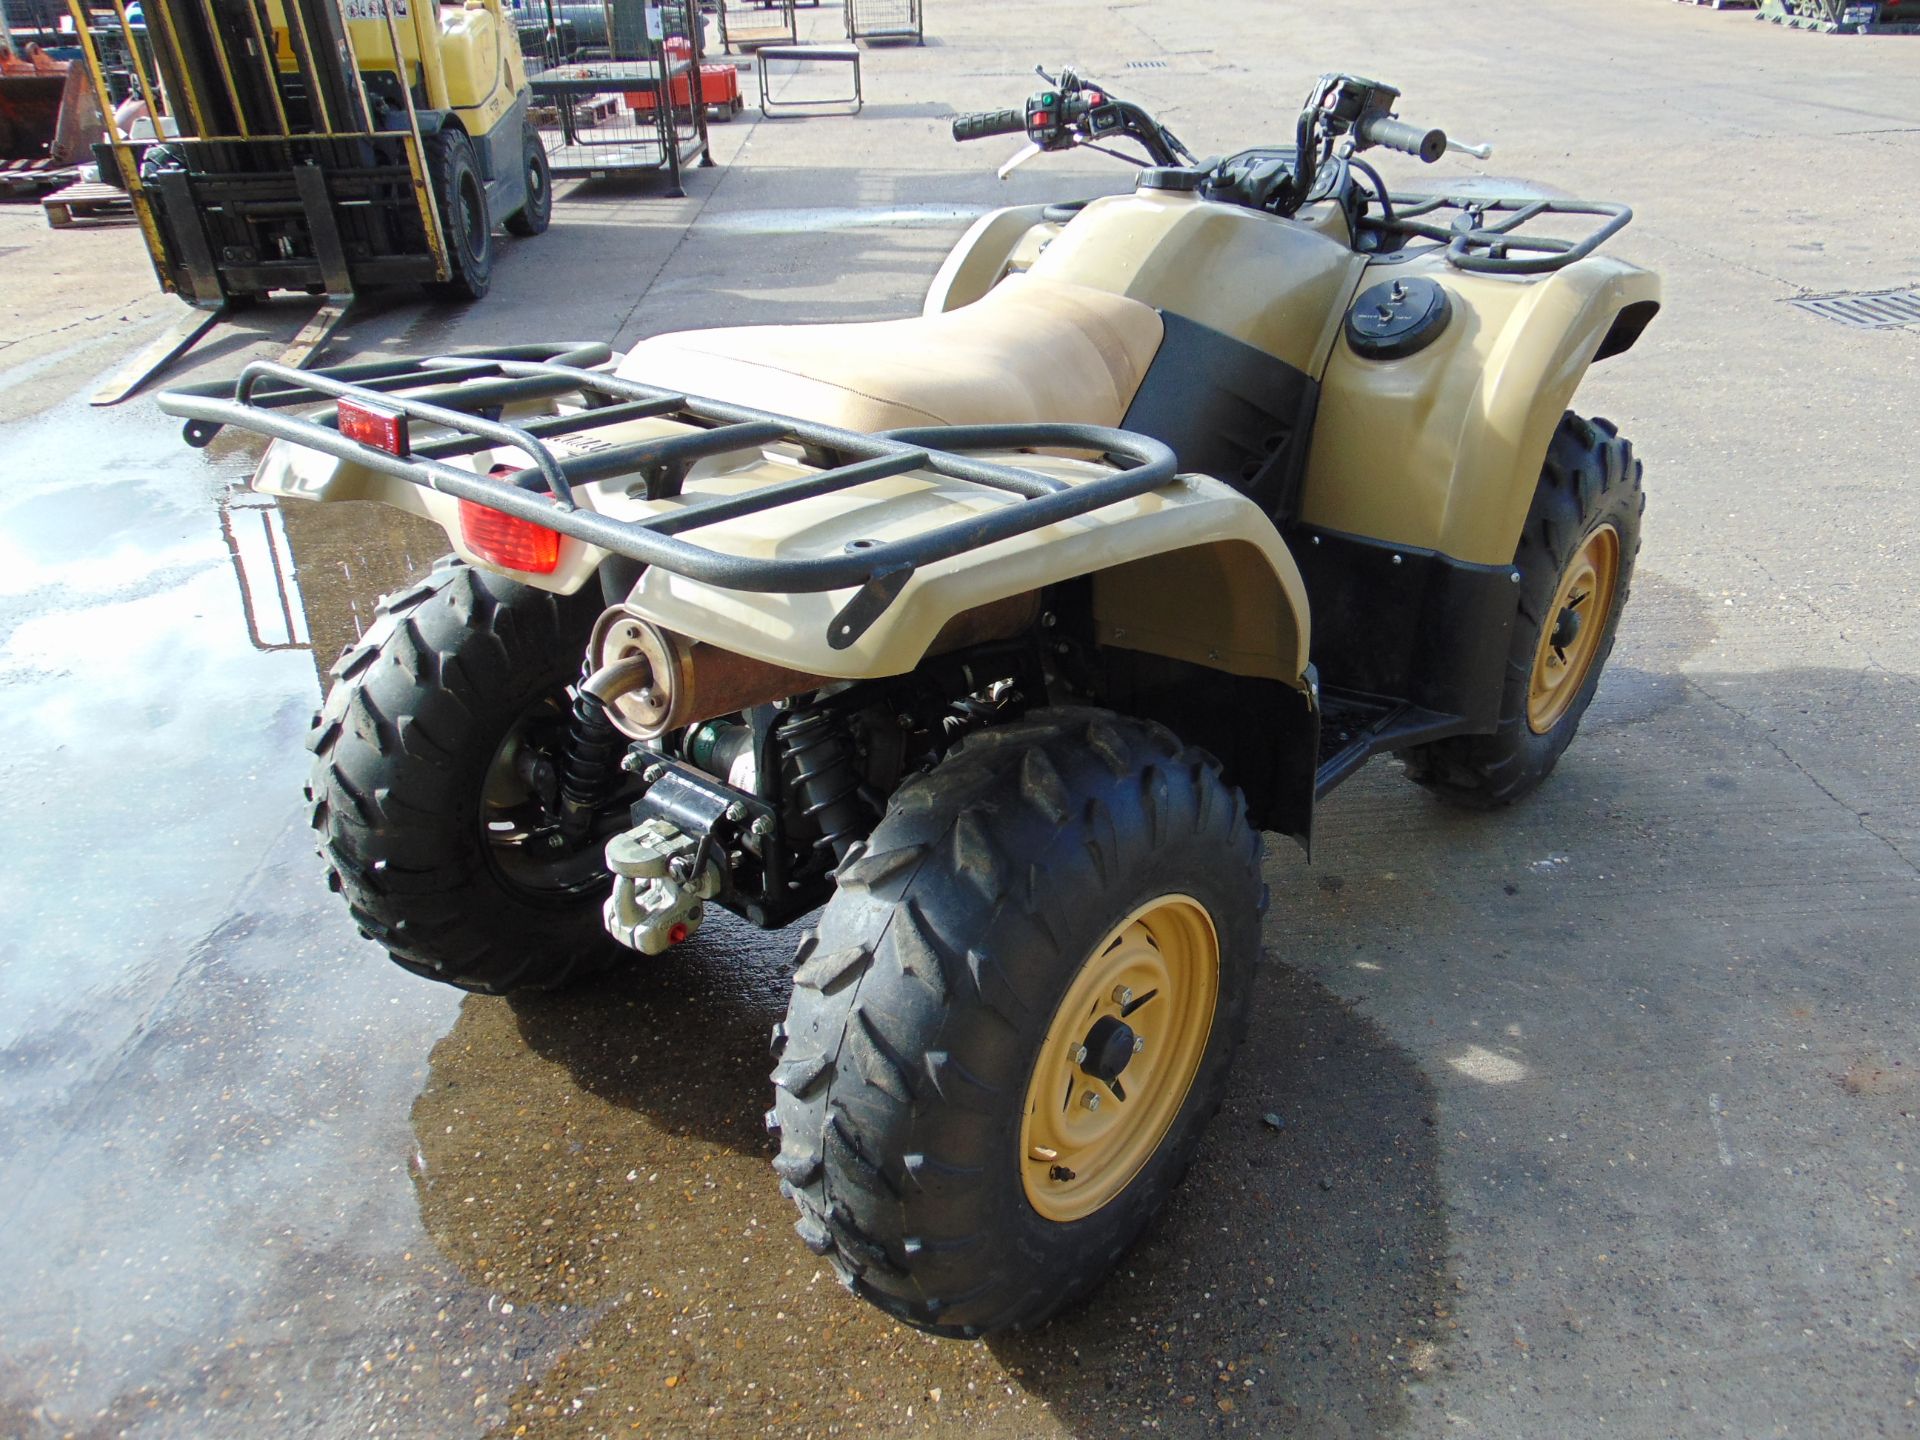 Military Specification Yamaha Grizzly 450 4 x 4 ATV Quad Bike ONLY 214 HOURS!!! - Image 8 of 22